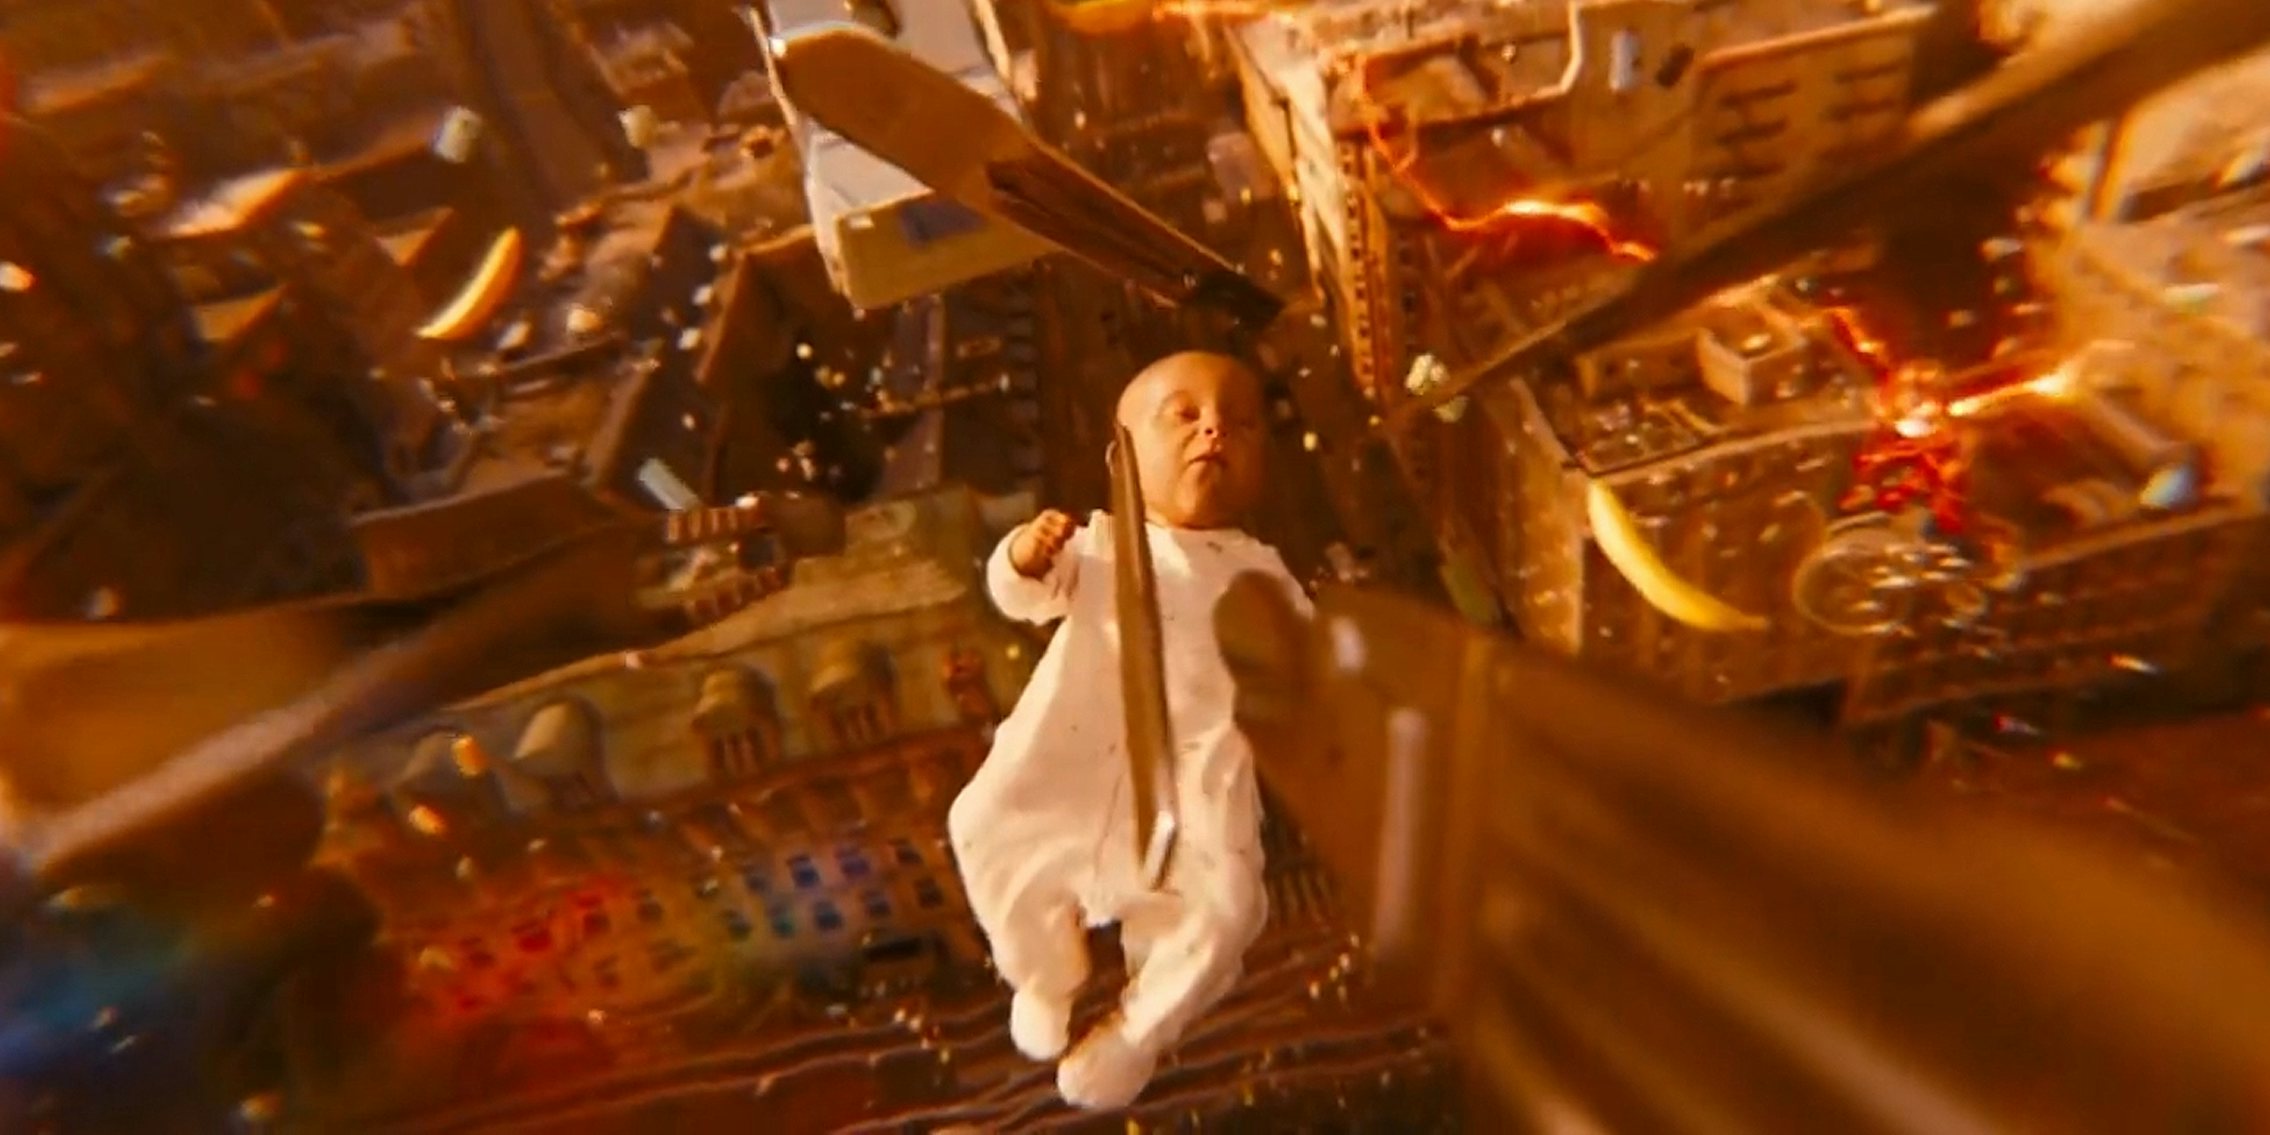 The Flash babies falling scene baby falling in city